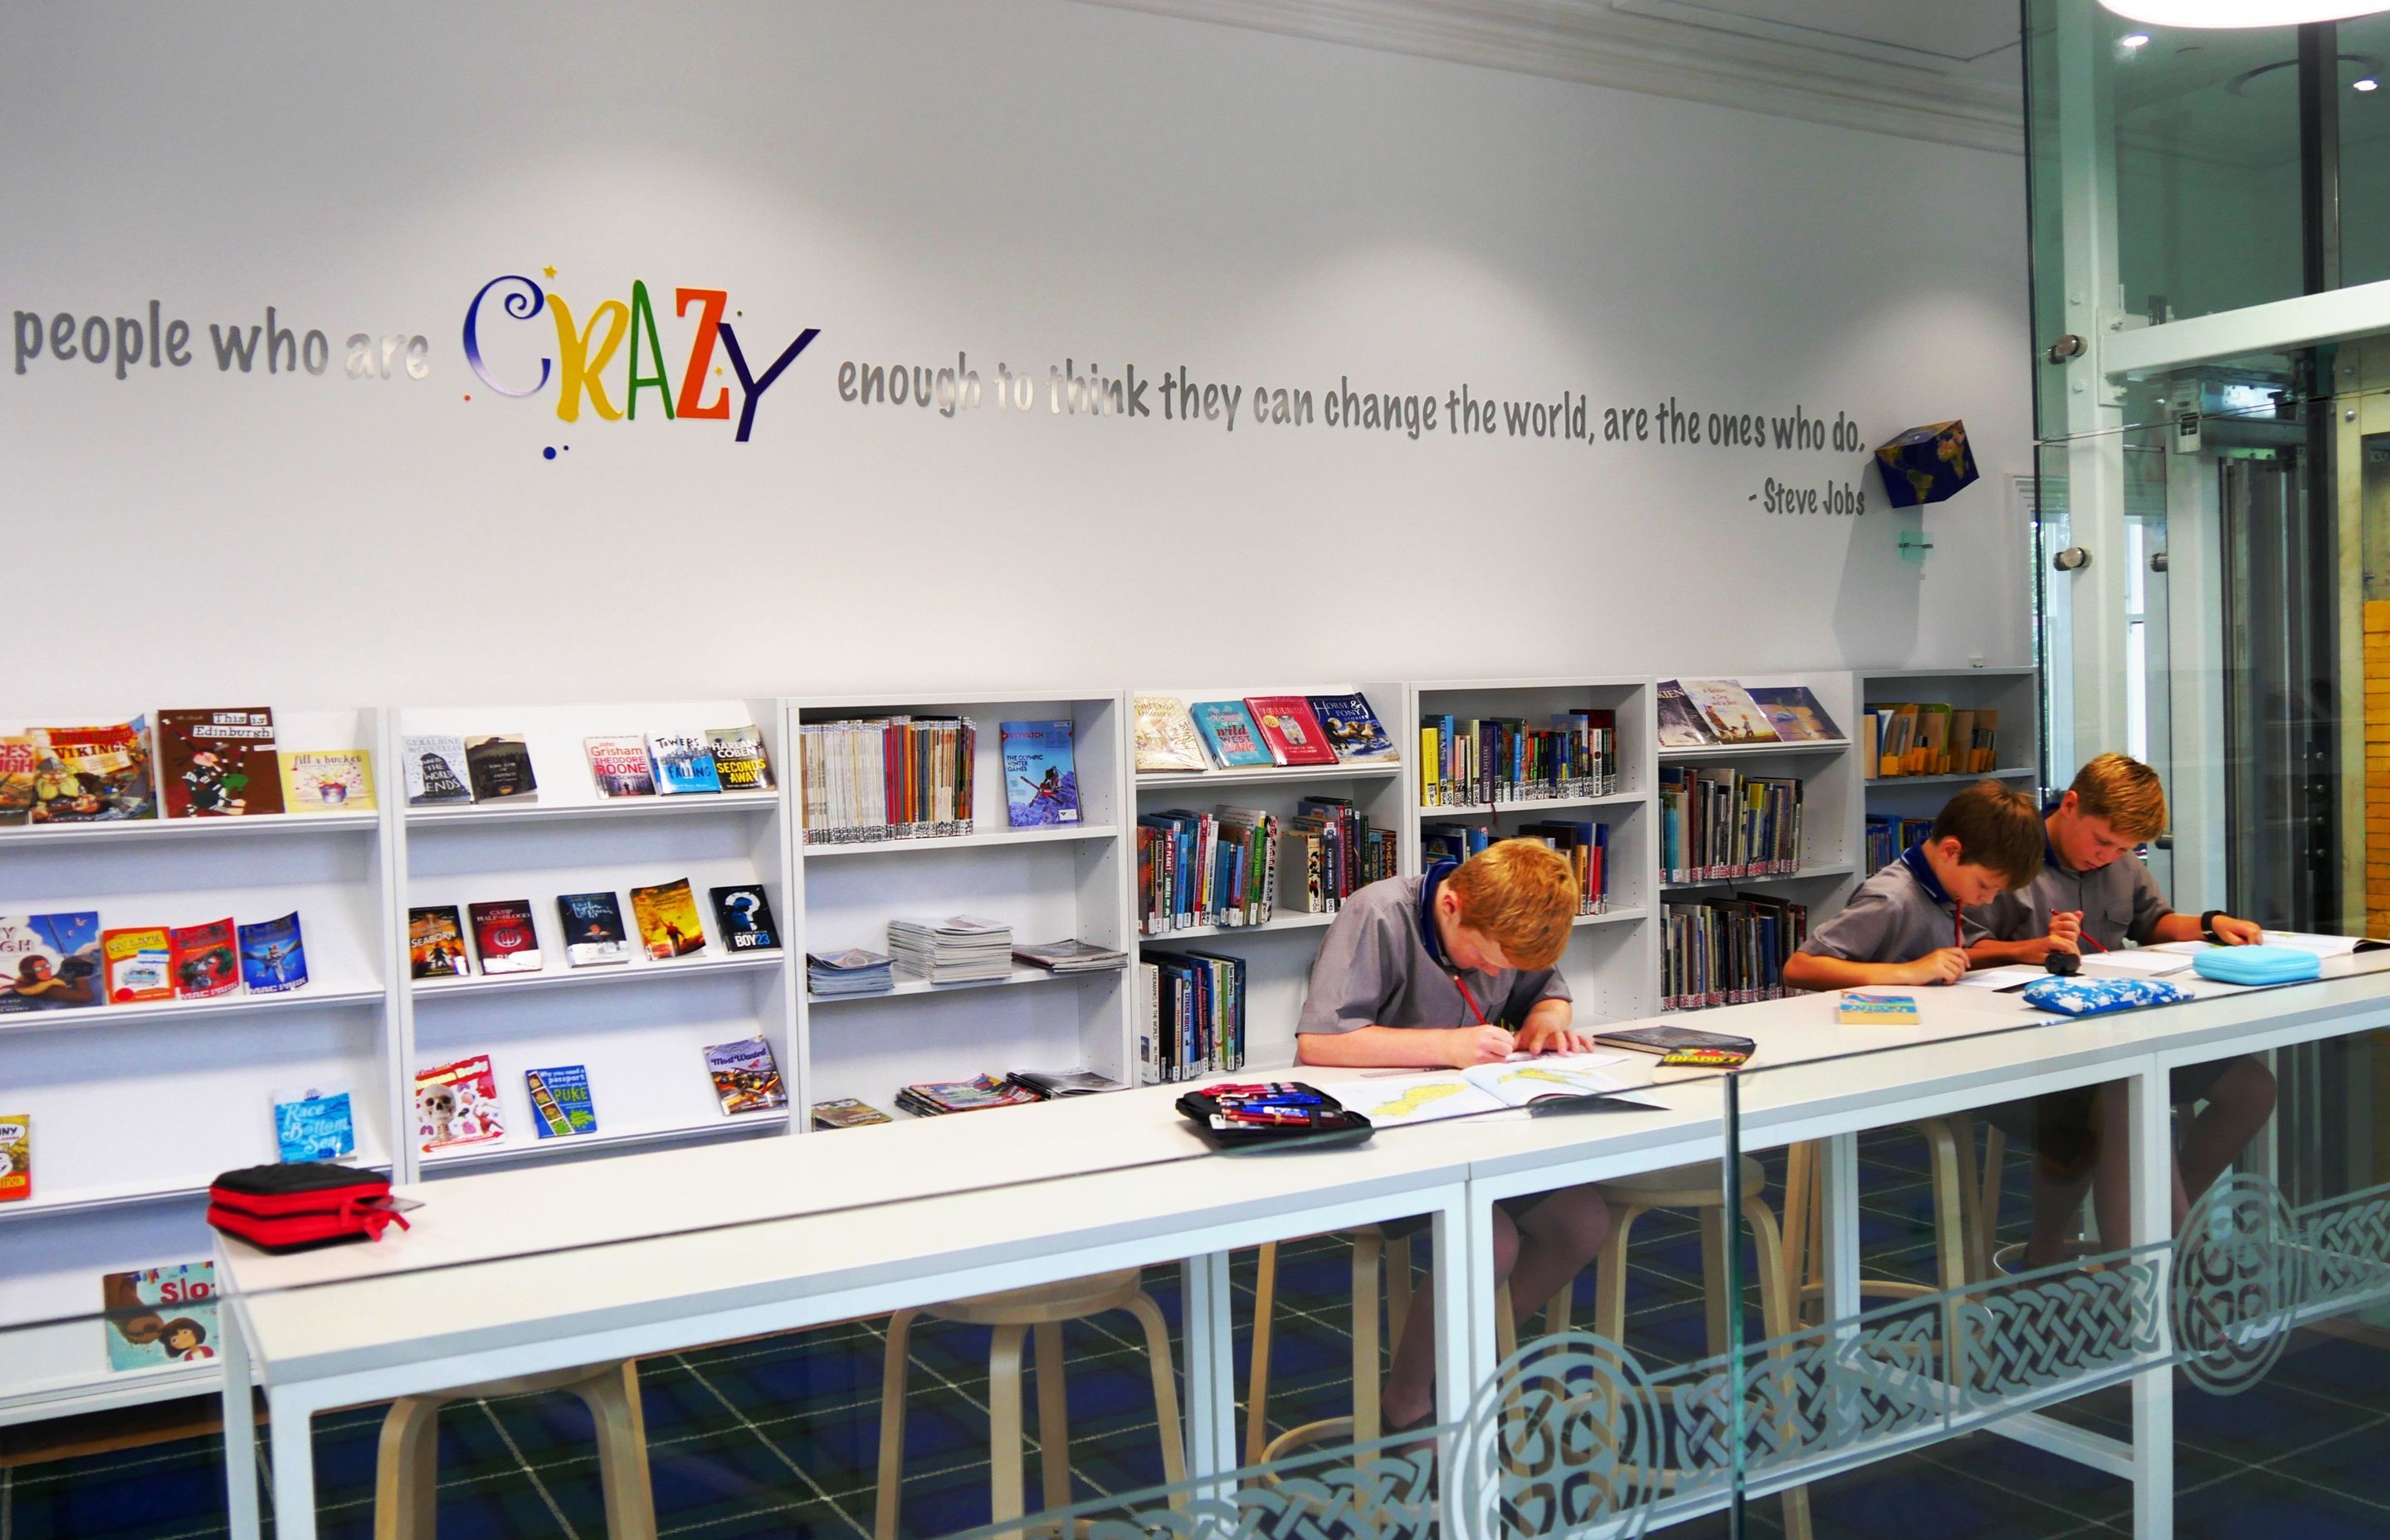 Books are hero, and inspirational messages adorn the walls. School insignia adorn the glazing balustrades.